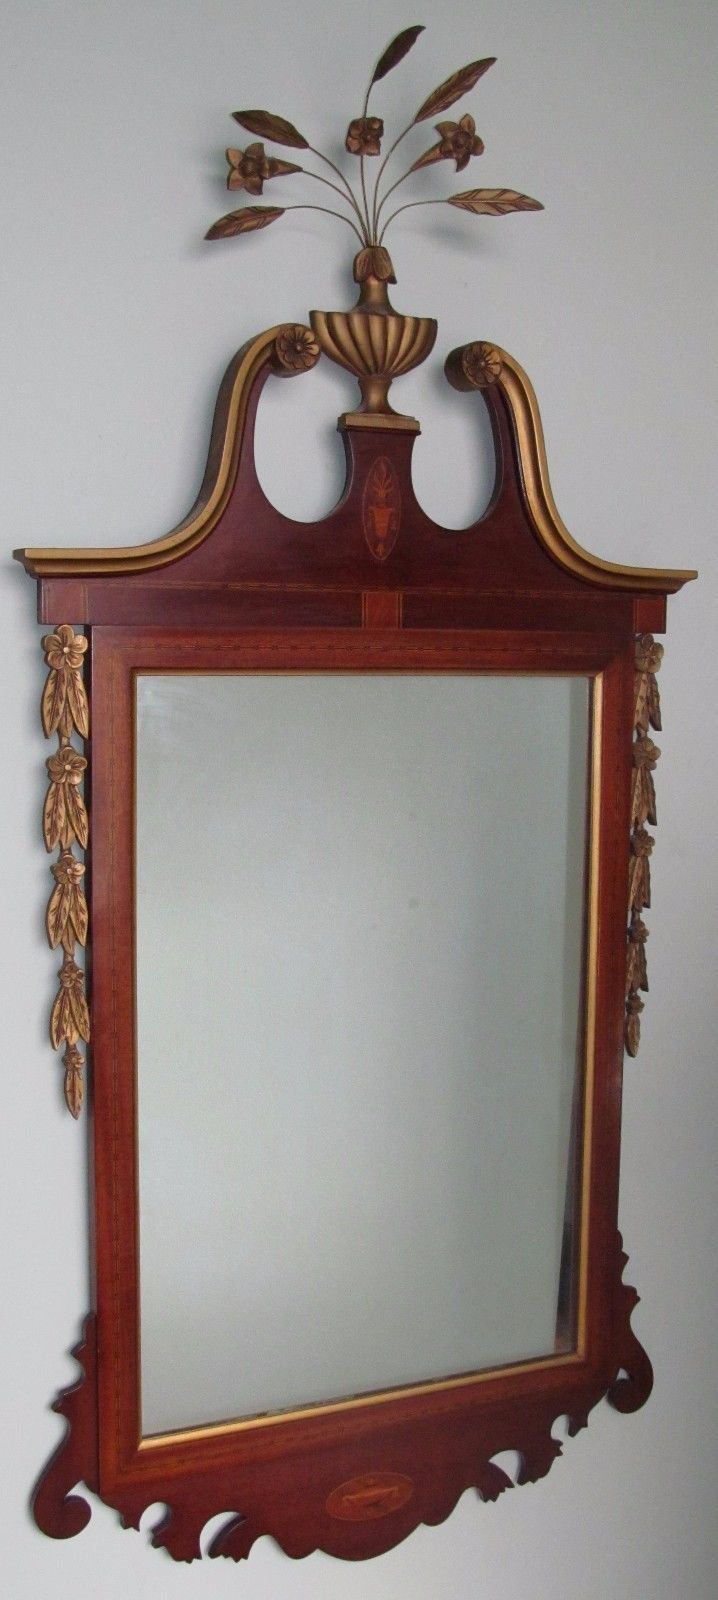 FINELY INLAID FEDERAL MAHOGANY MIRROR WITH CARVED & GOLD GILT EMBELLISHMENTS